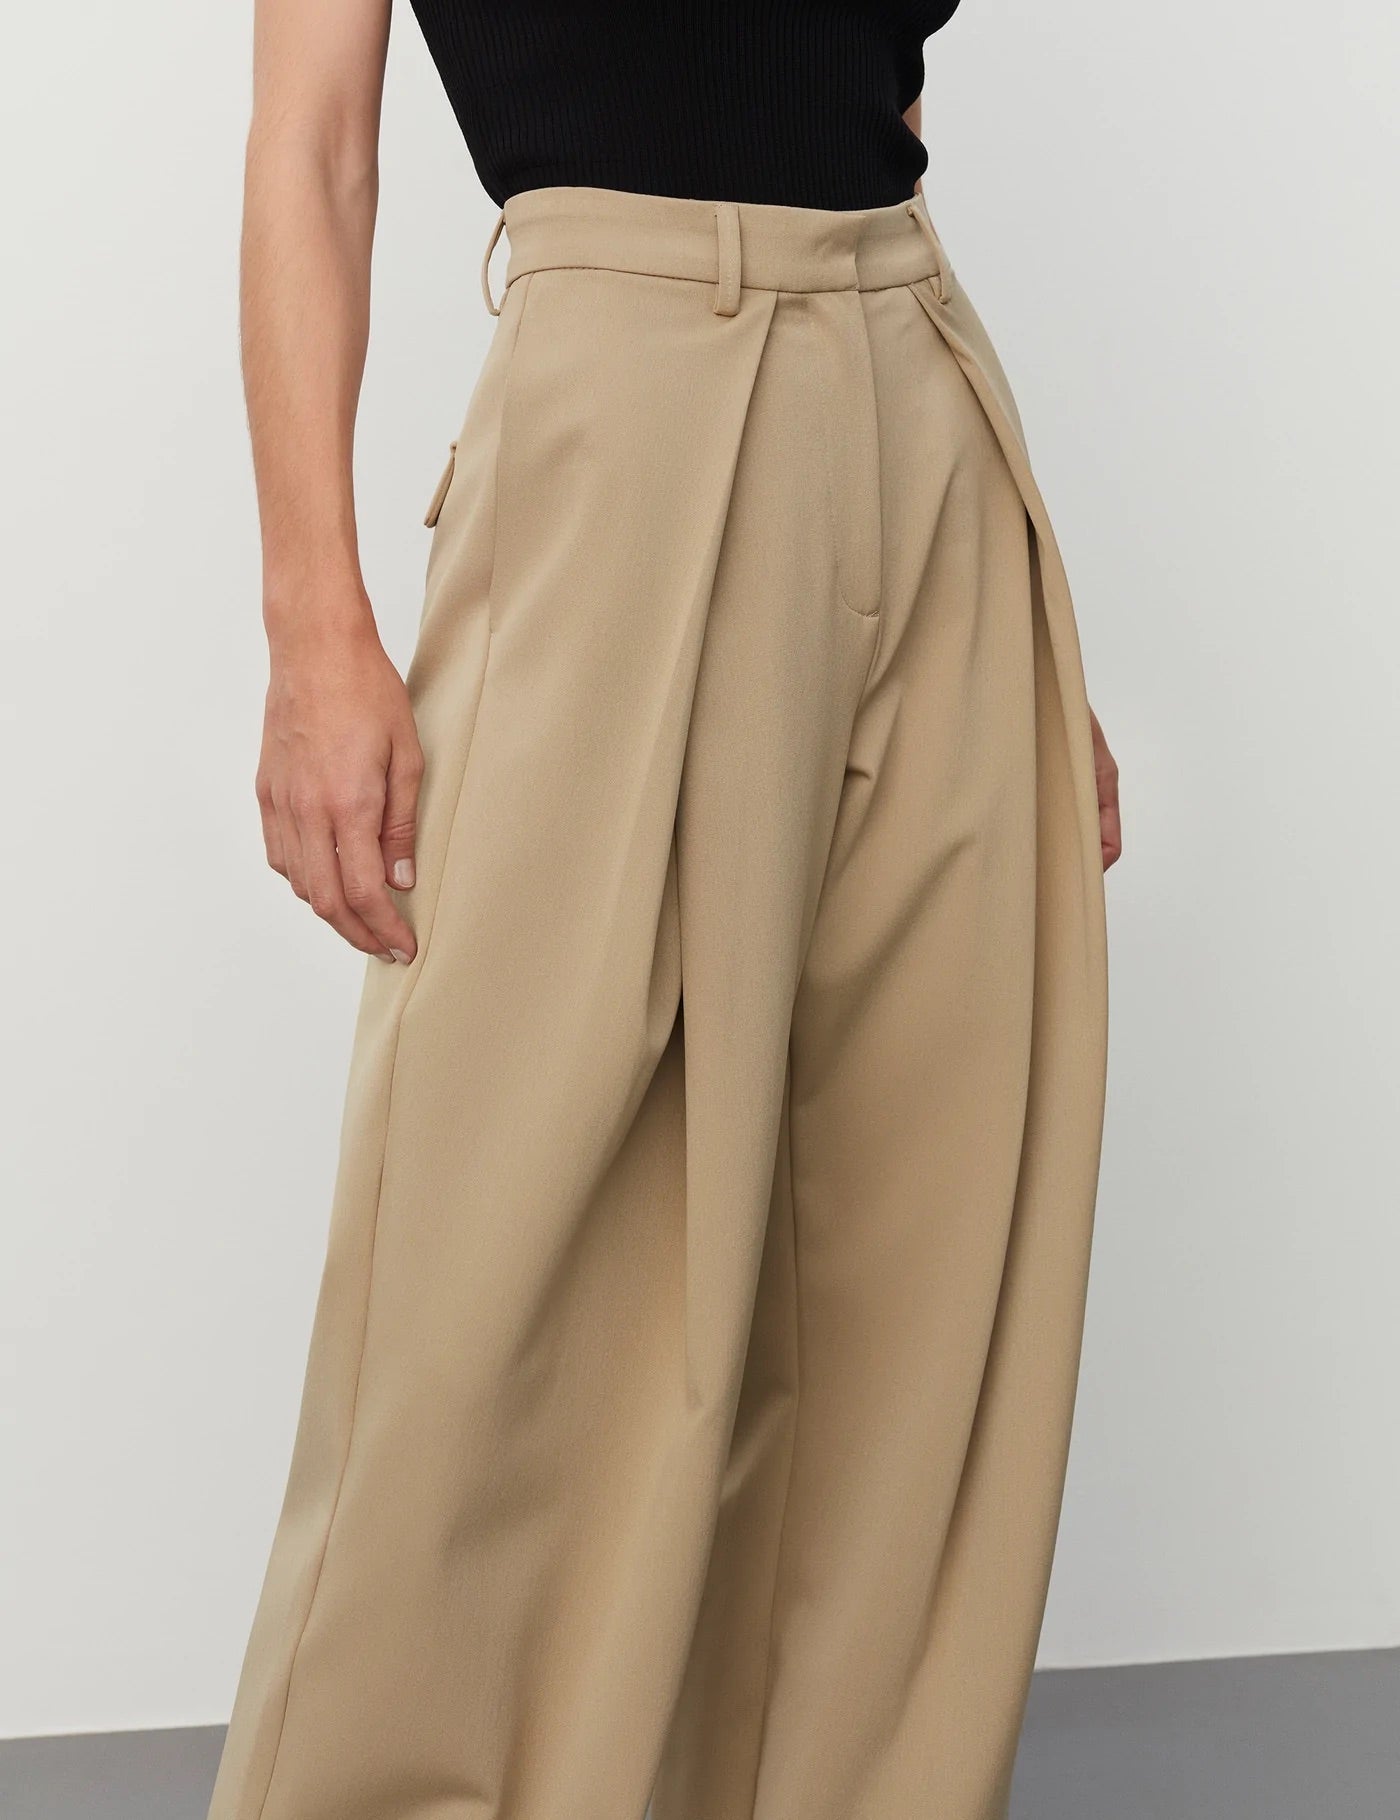 Almeida Pants - Babs The Label